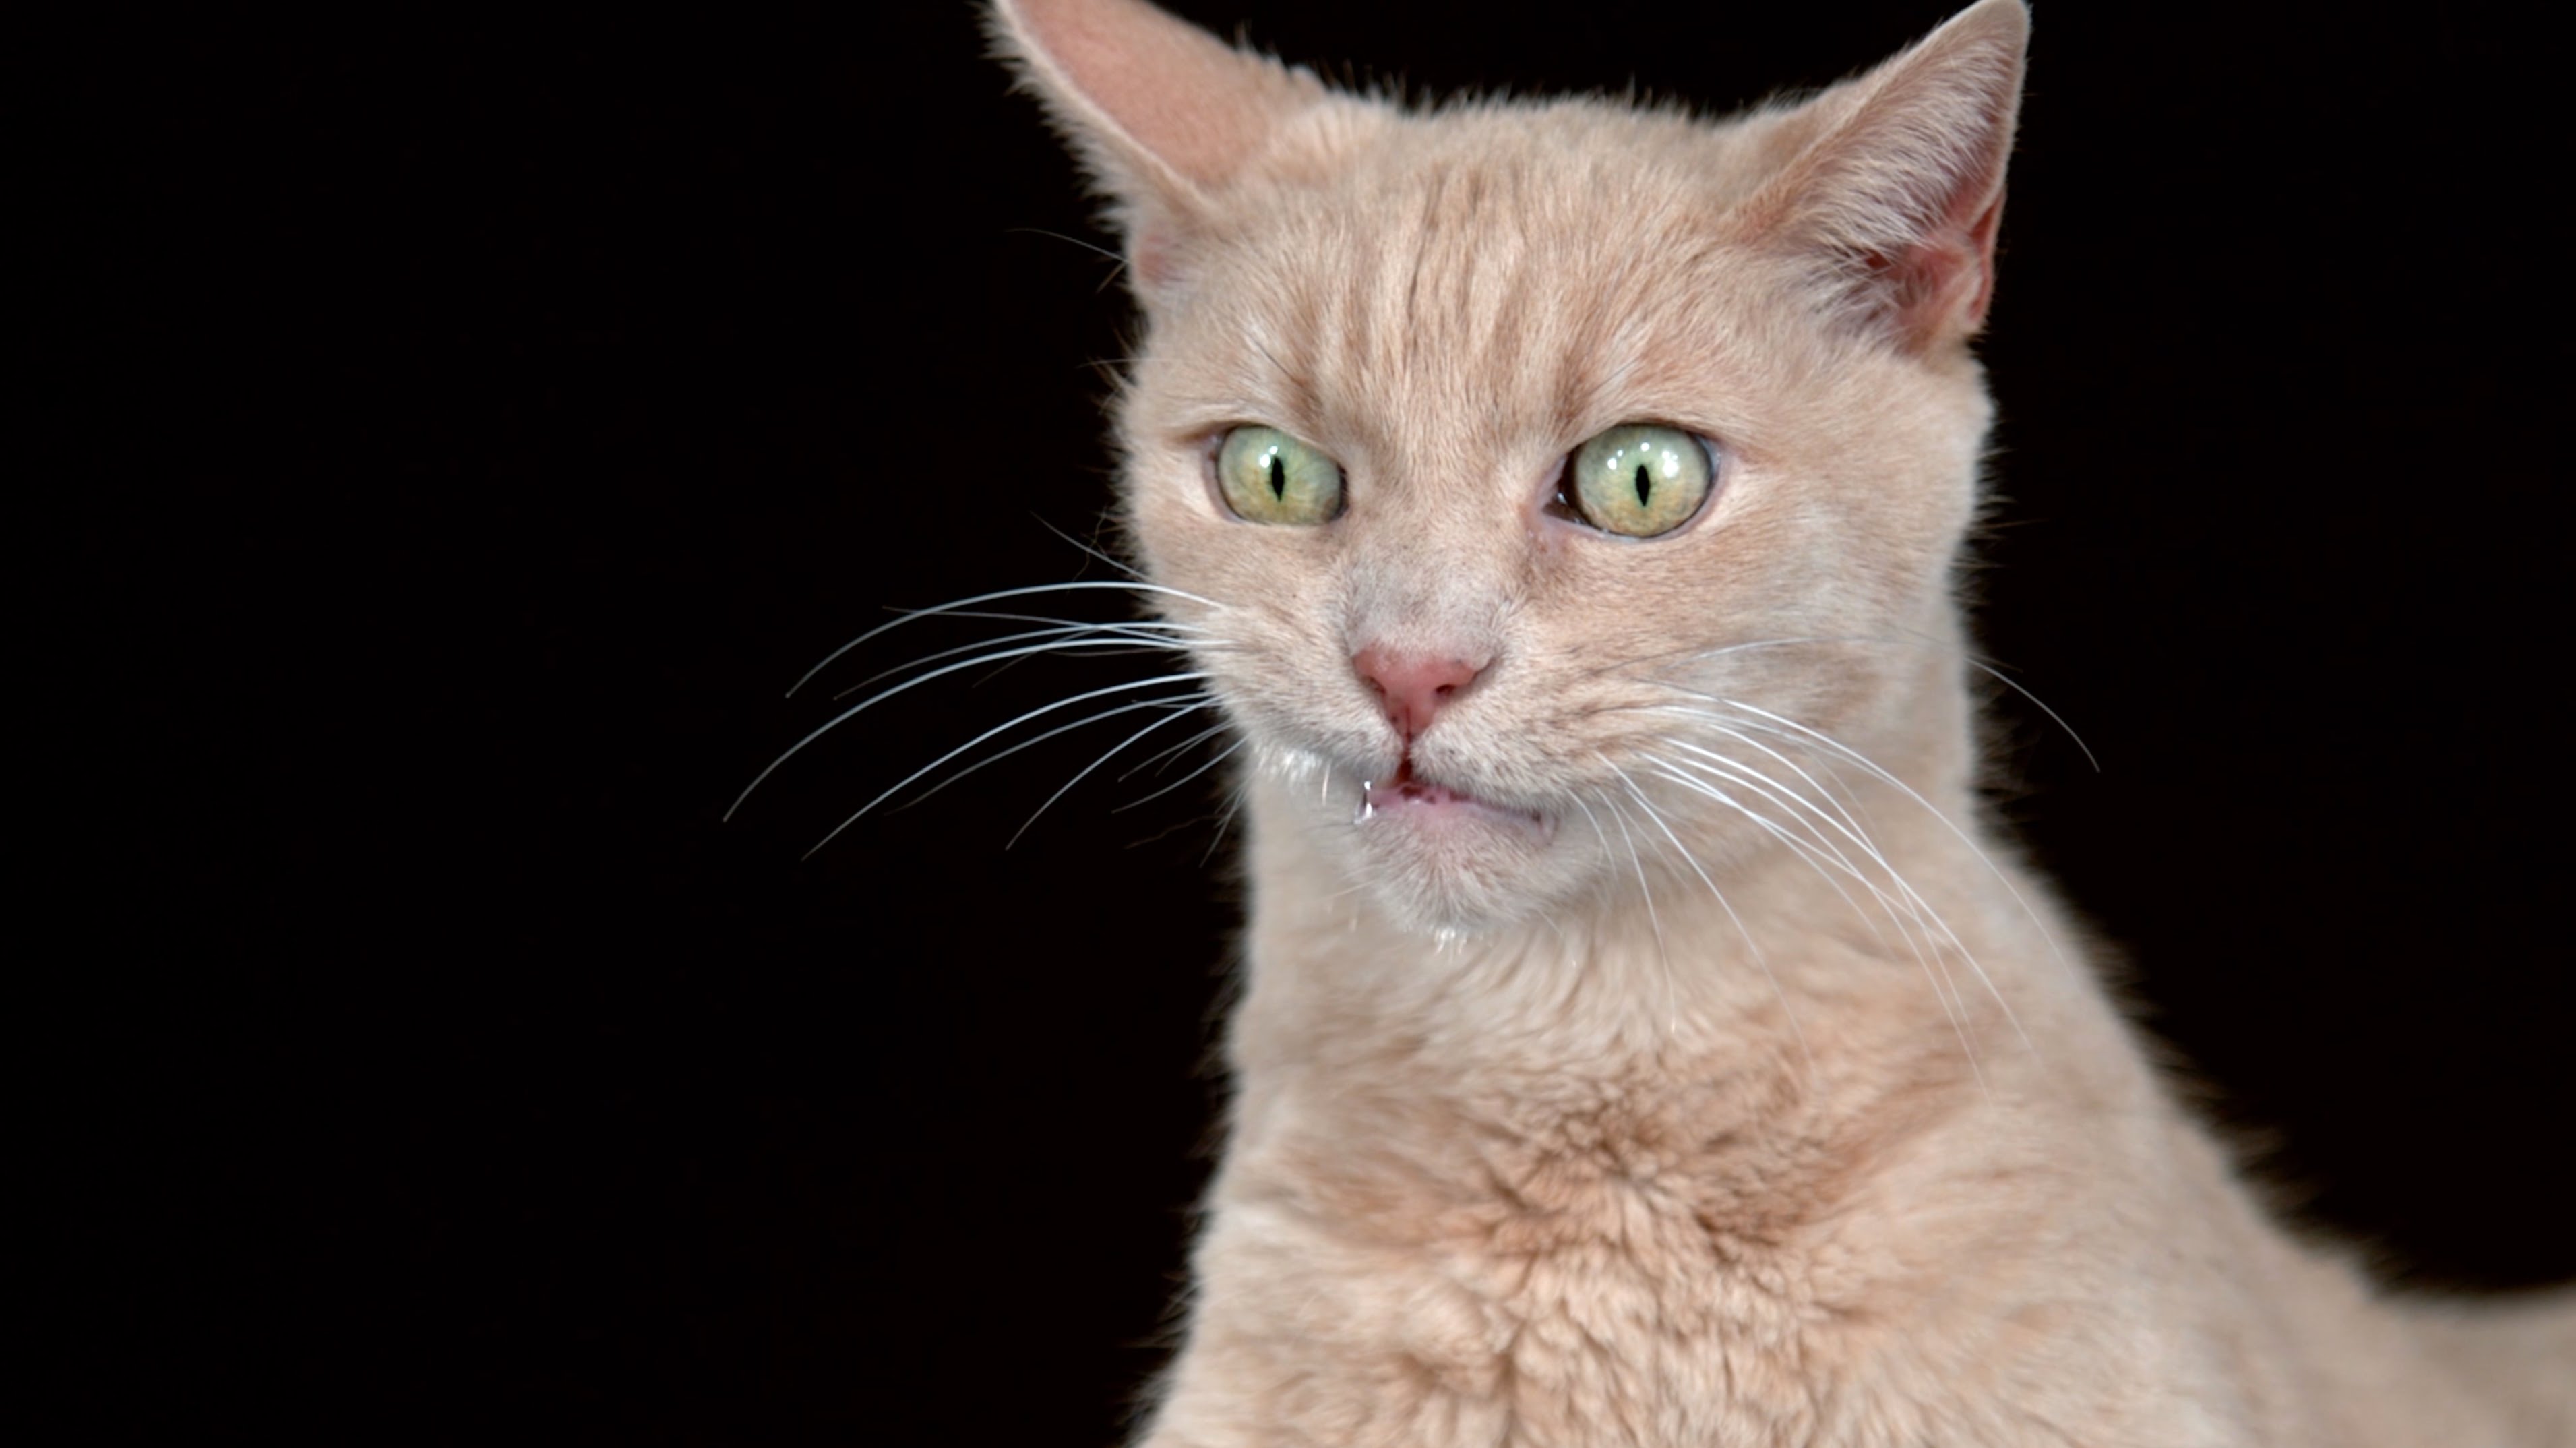 ‘Shake Cats’ Photo Series Captures the Hilarious Faces of Cats Shaking